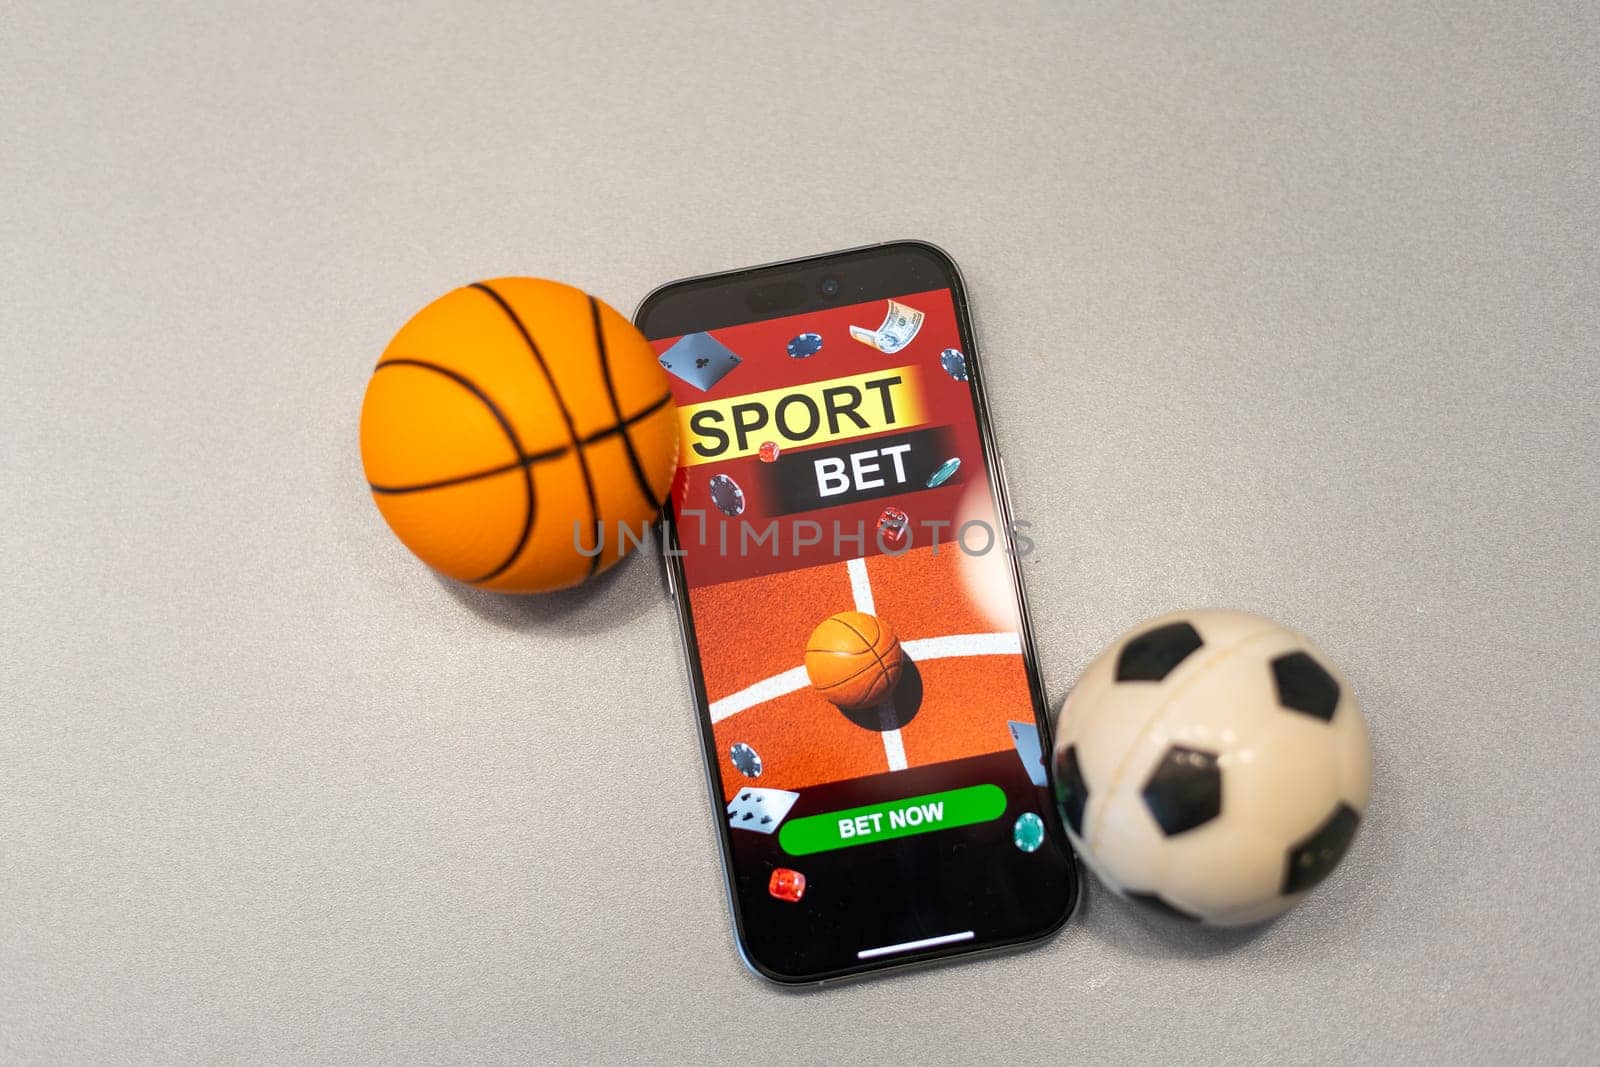 Sports betting website in a mobile phone screen, ball, money. High quality photo